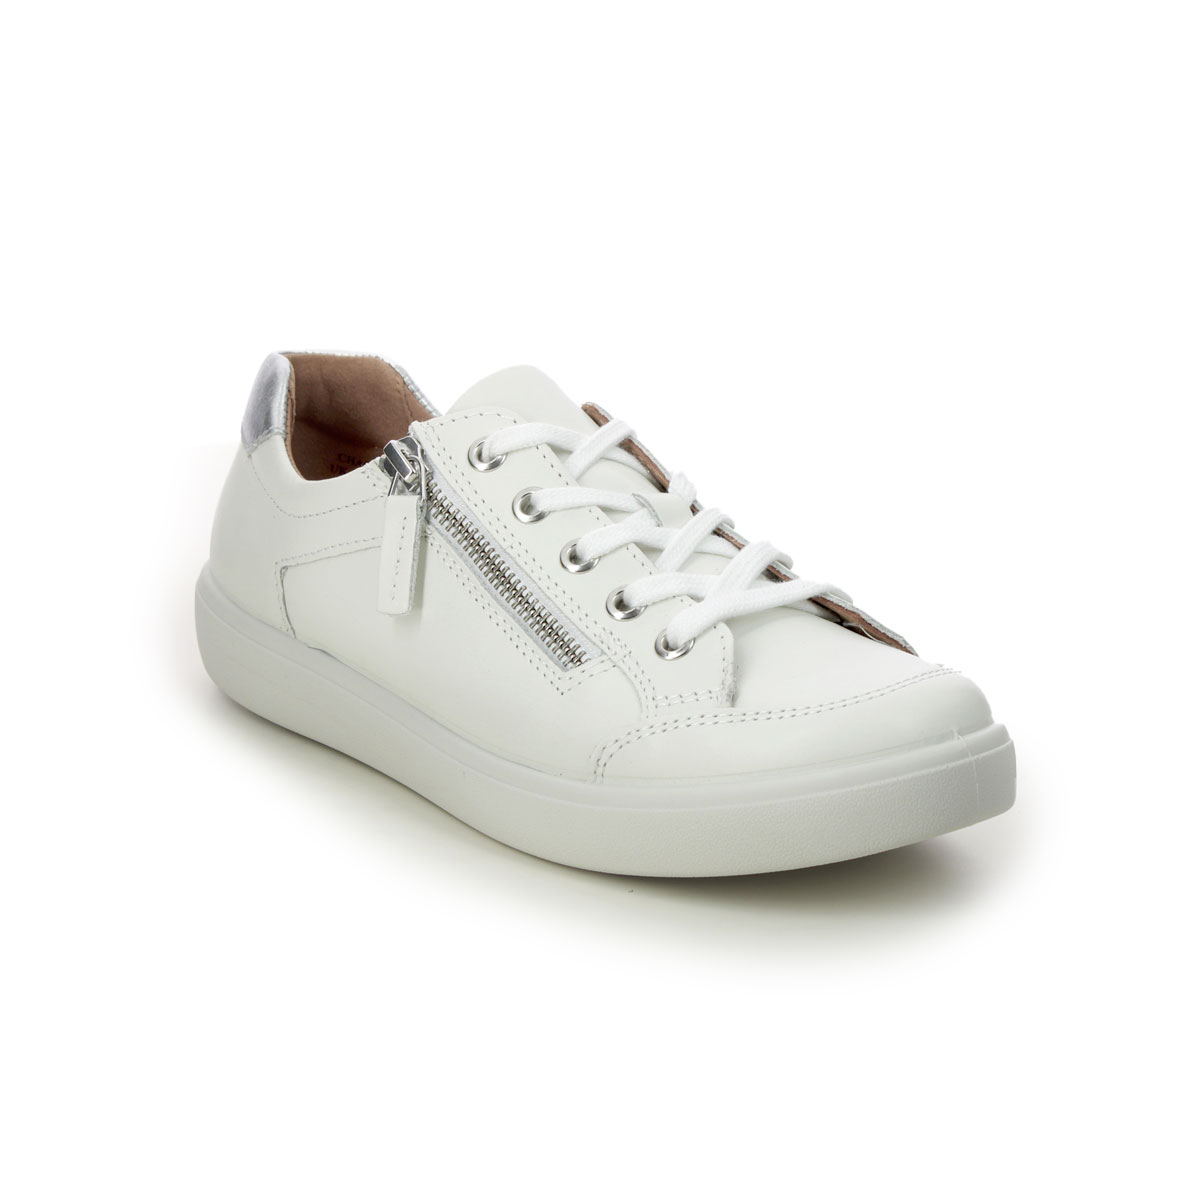 Hotter Chase 2 Wide WHITE LEATHER Womens trainers 16111-61 in a Plain Leather in Size 4.5